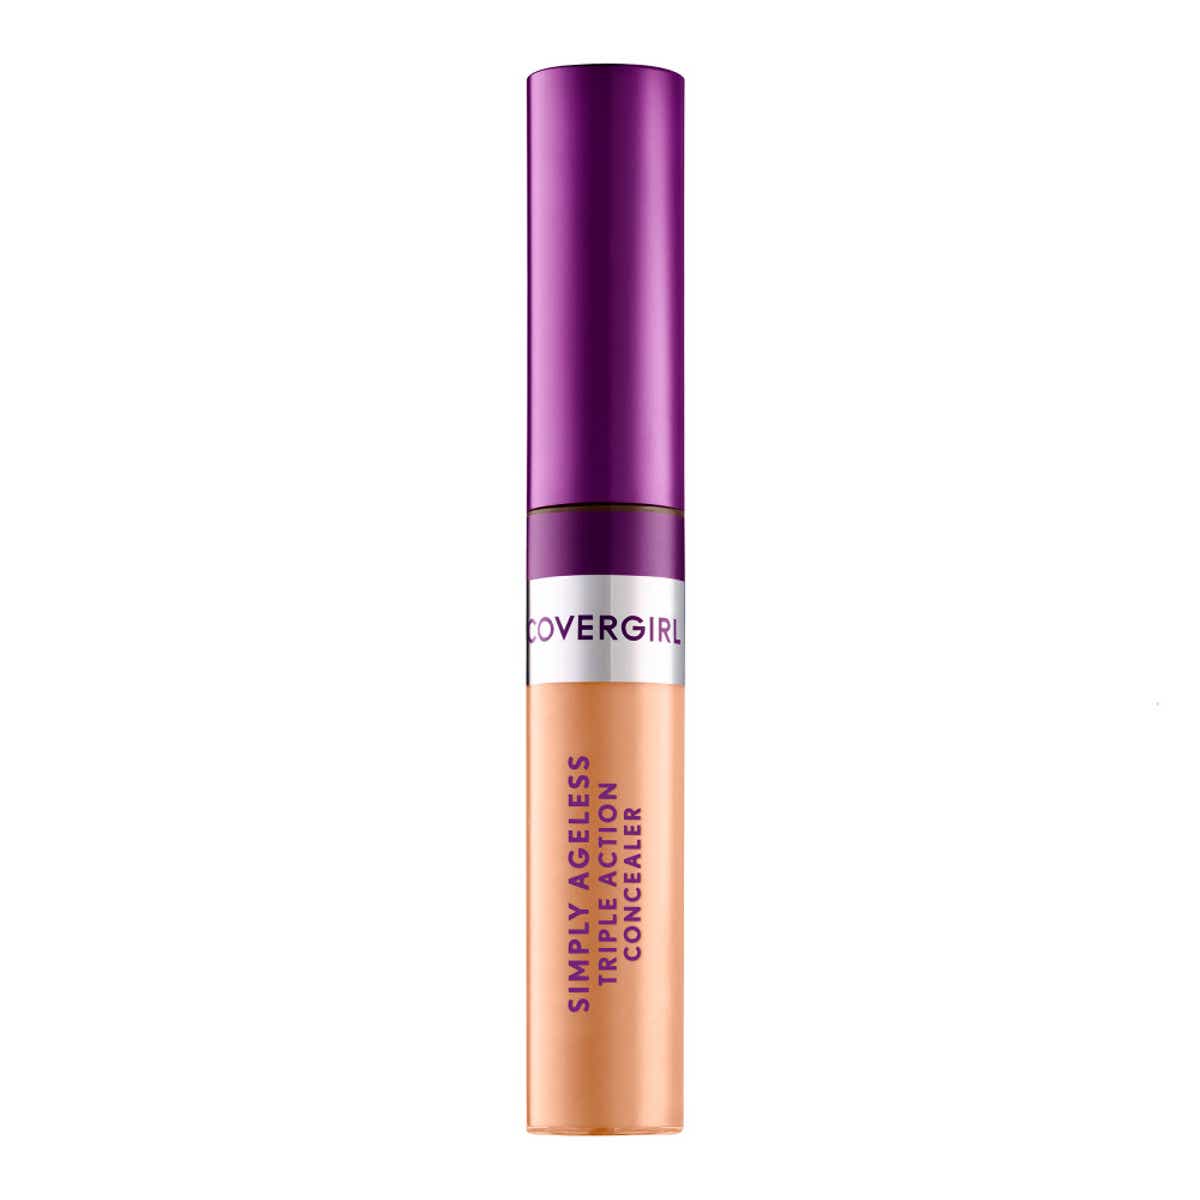 Simply Ageless Triple Action Concealer